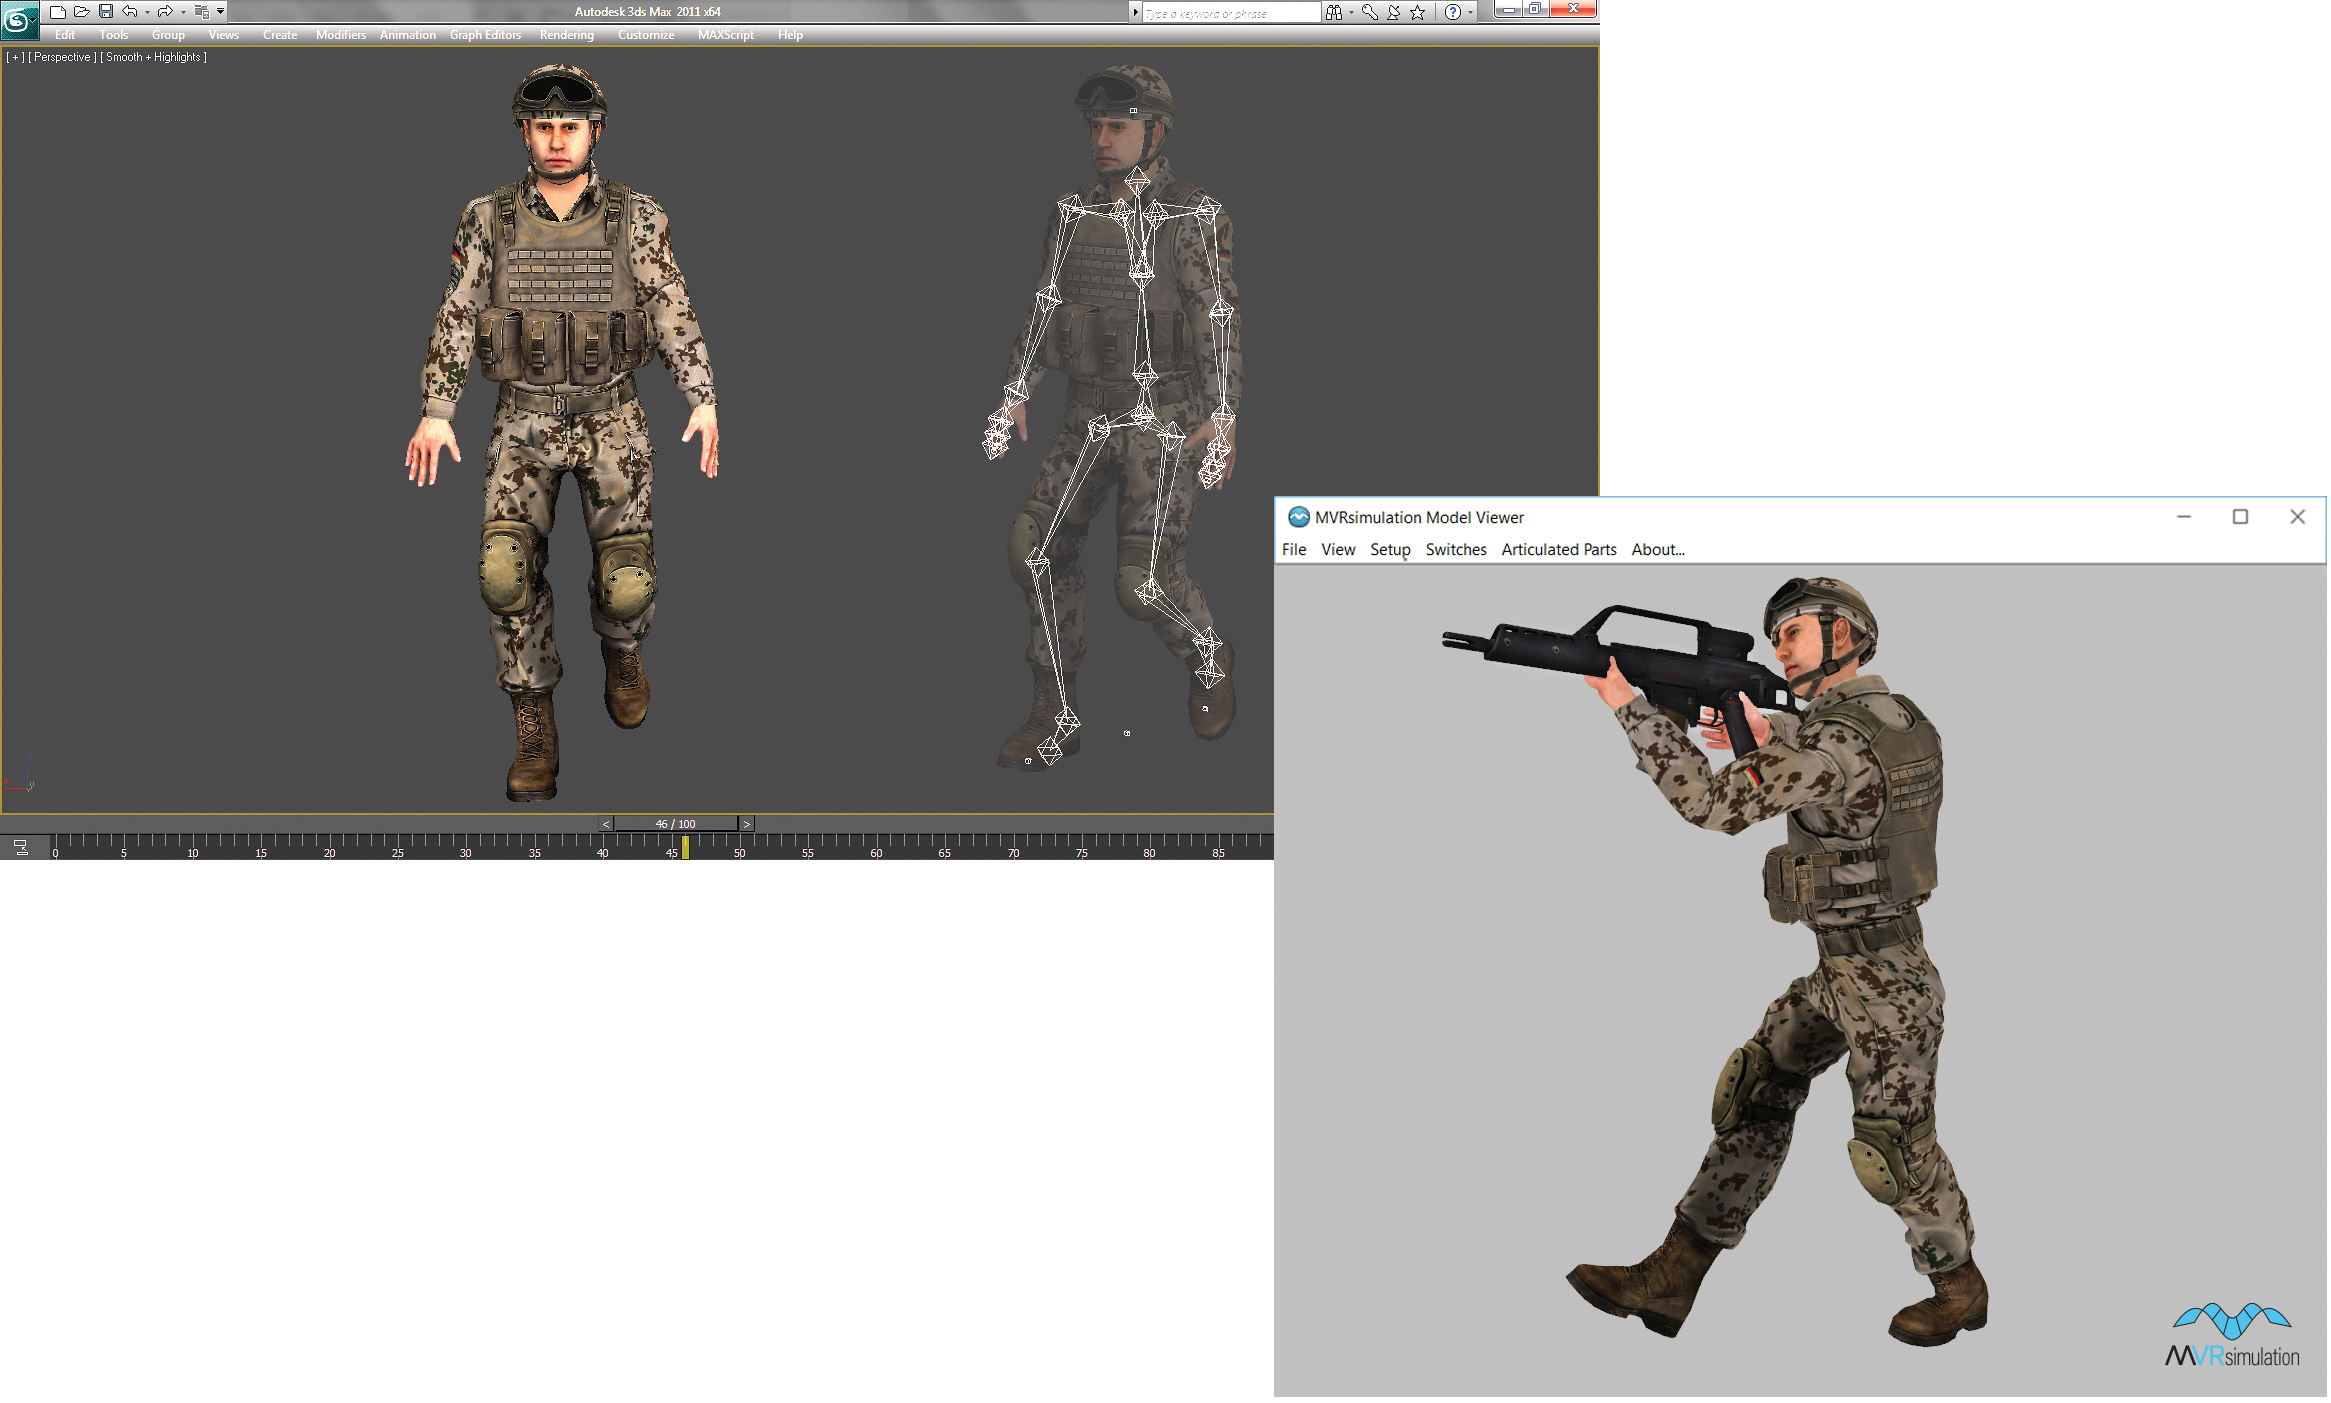 Preparation of a character model first in Autodesk 3ds Max, and following conversion to MVRsimulation's model format.